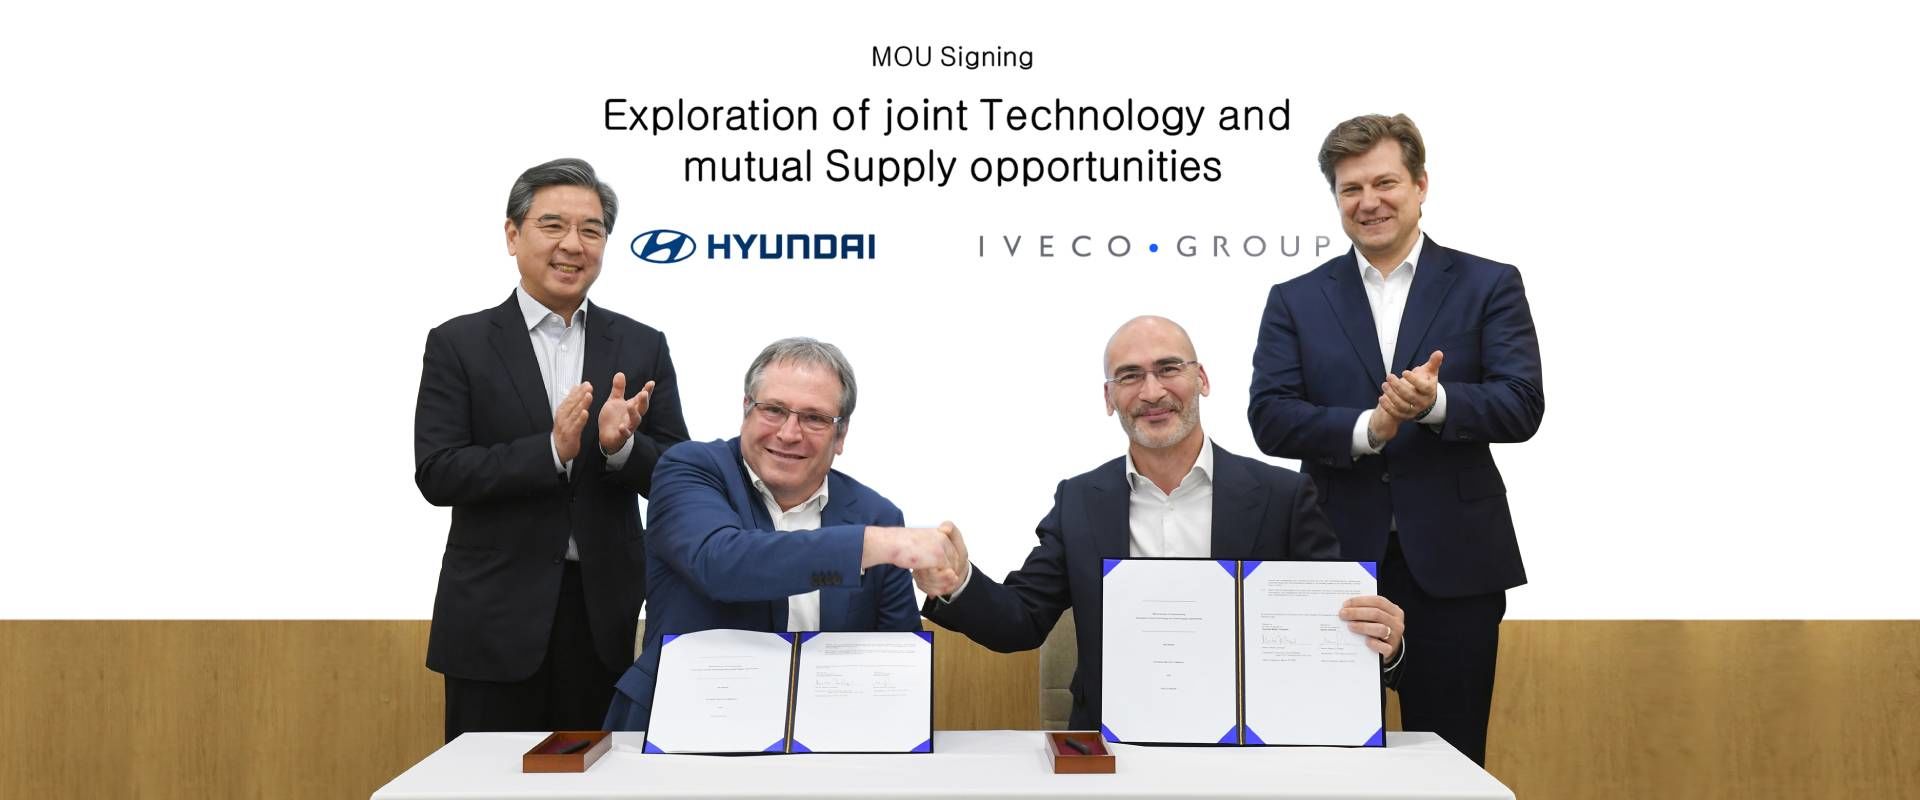 Hyundai Motor and Iveco Group Sign MOU to Explore Future Collaboration